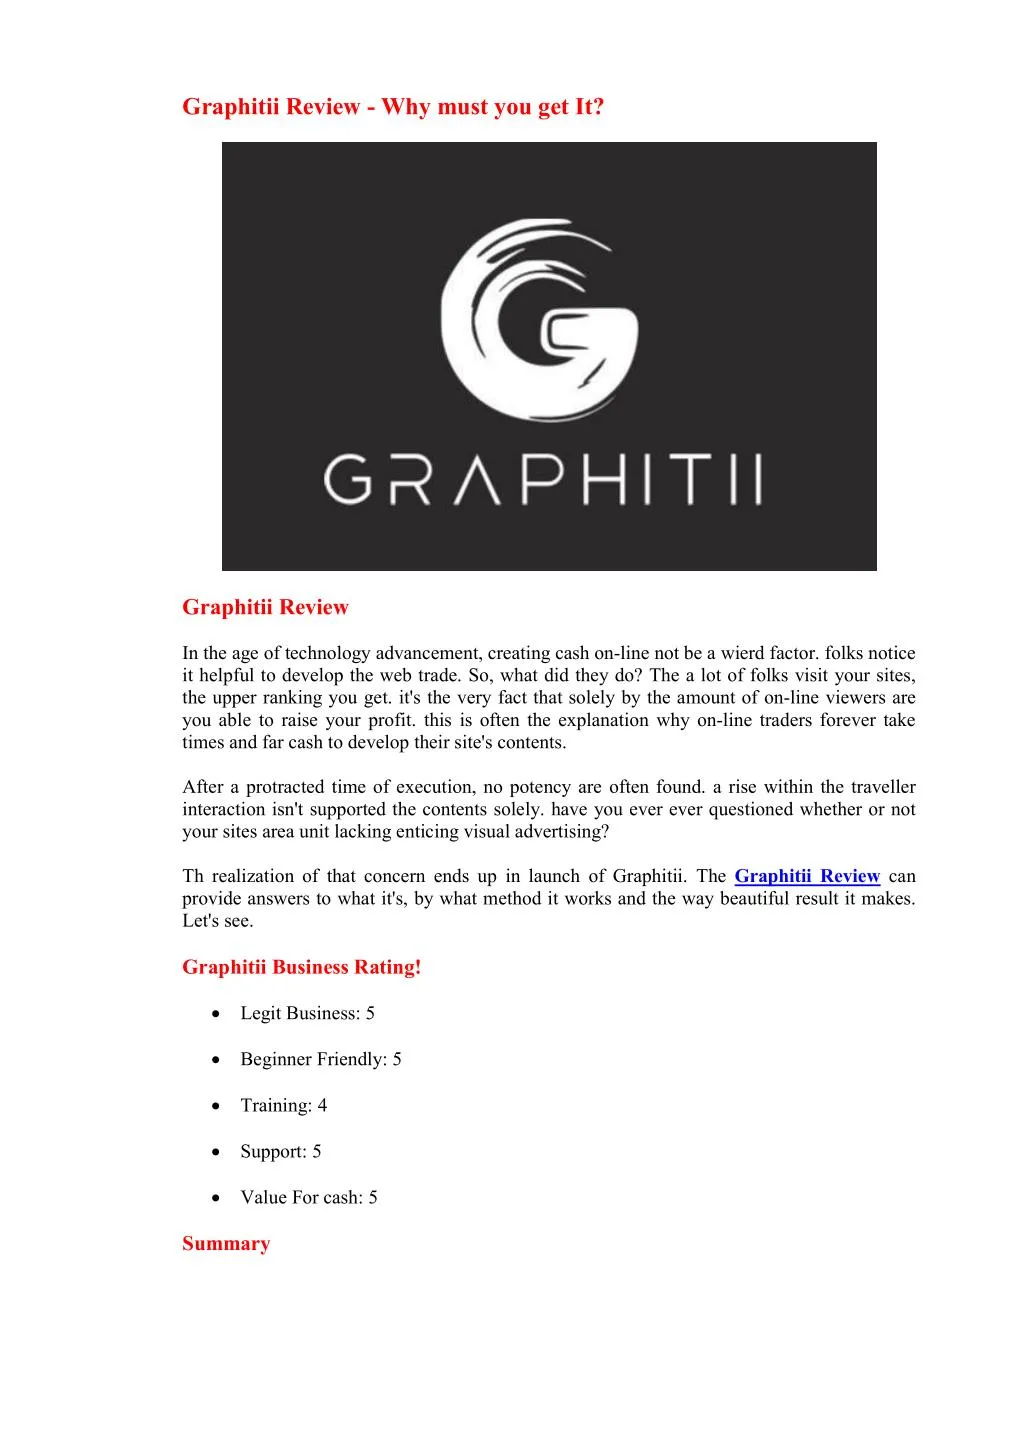 graphitii review why must you get it